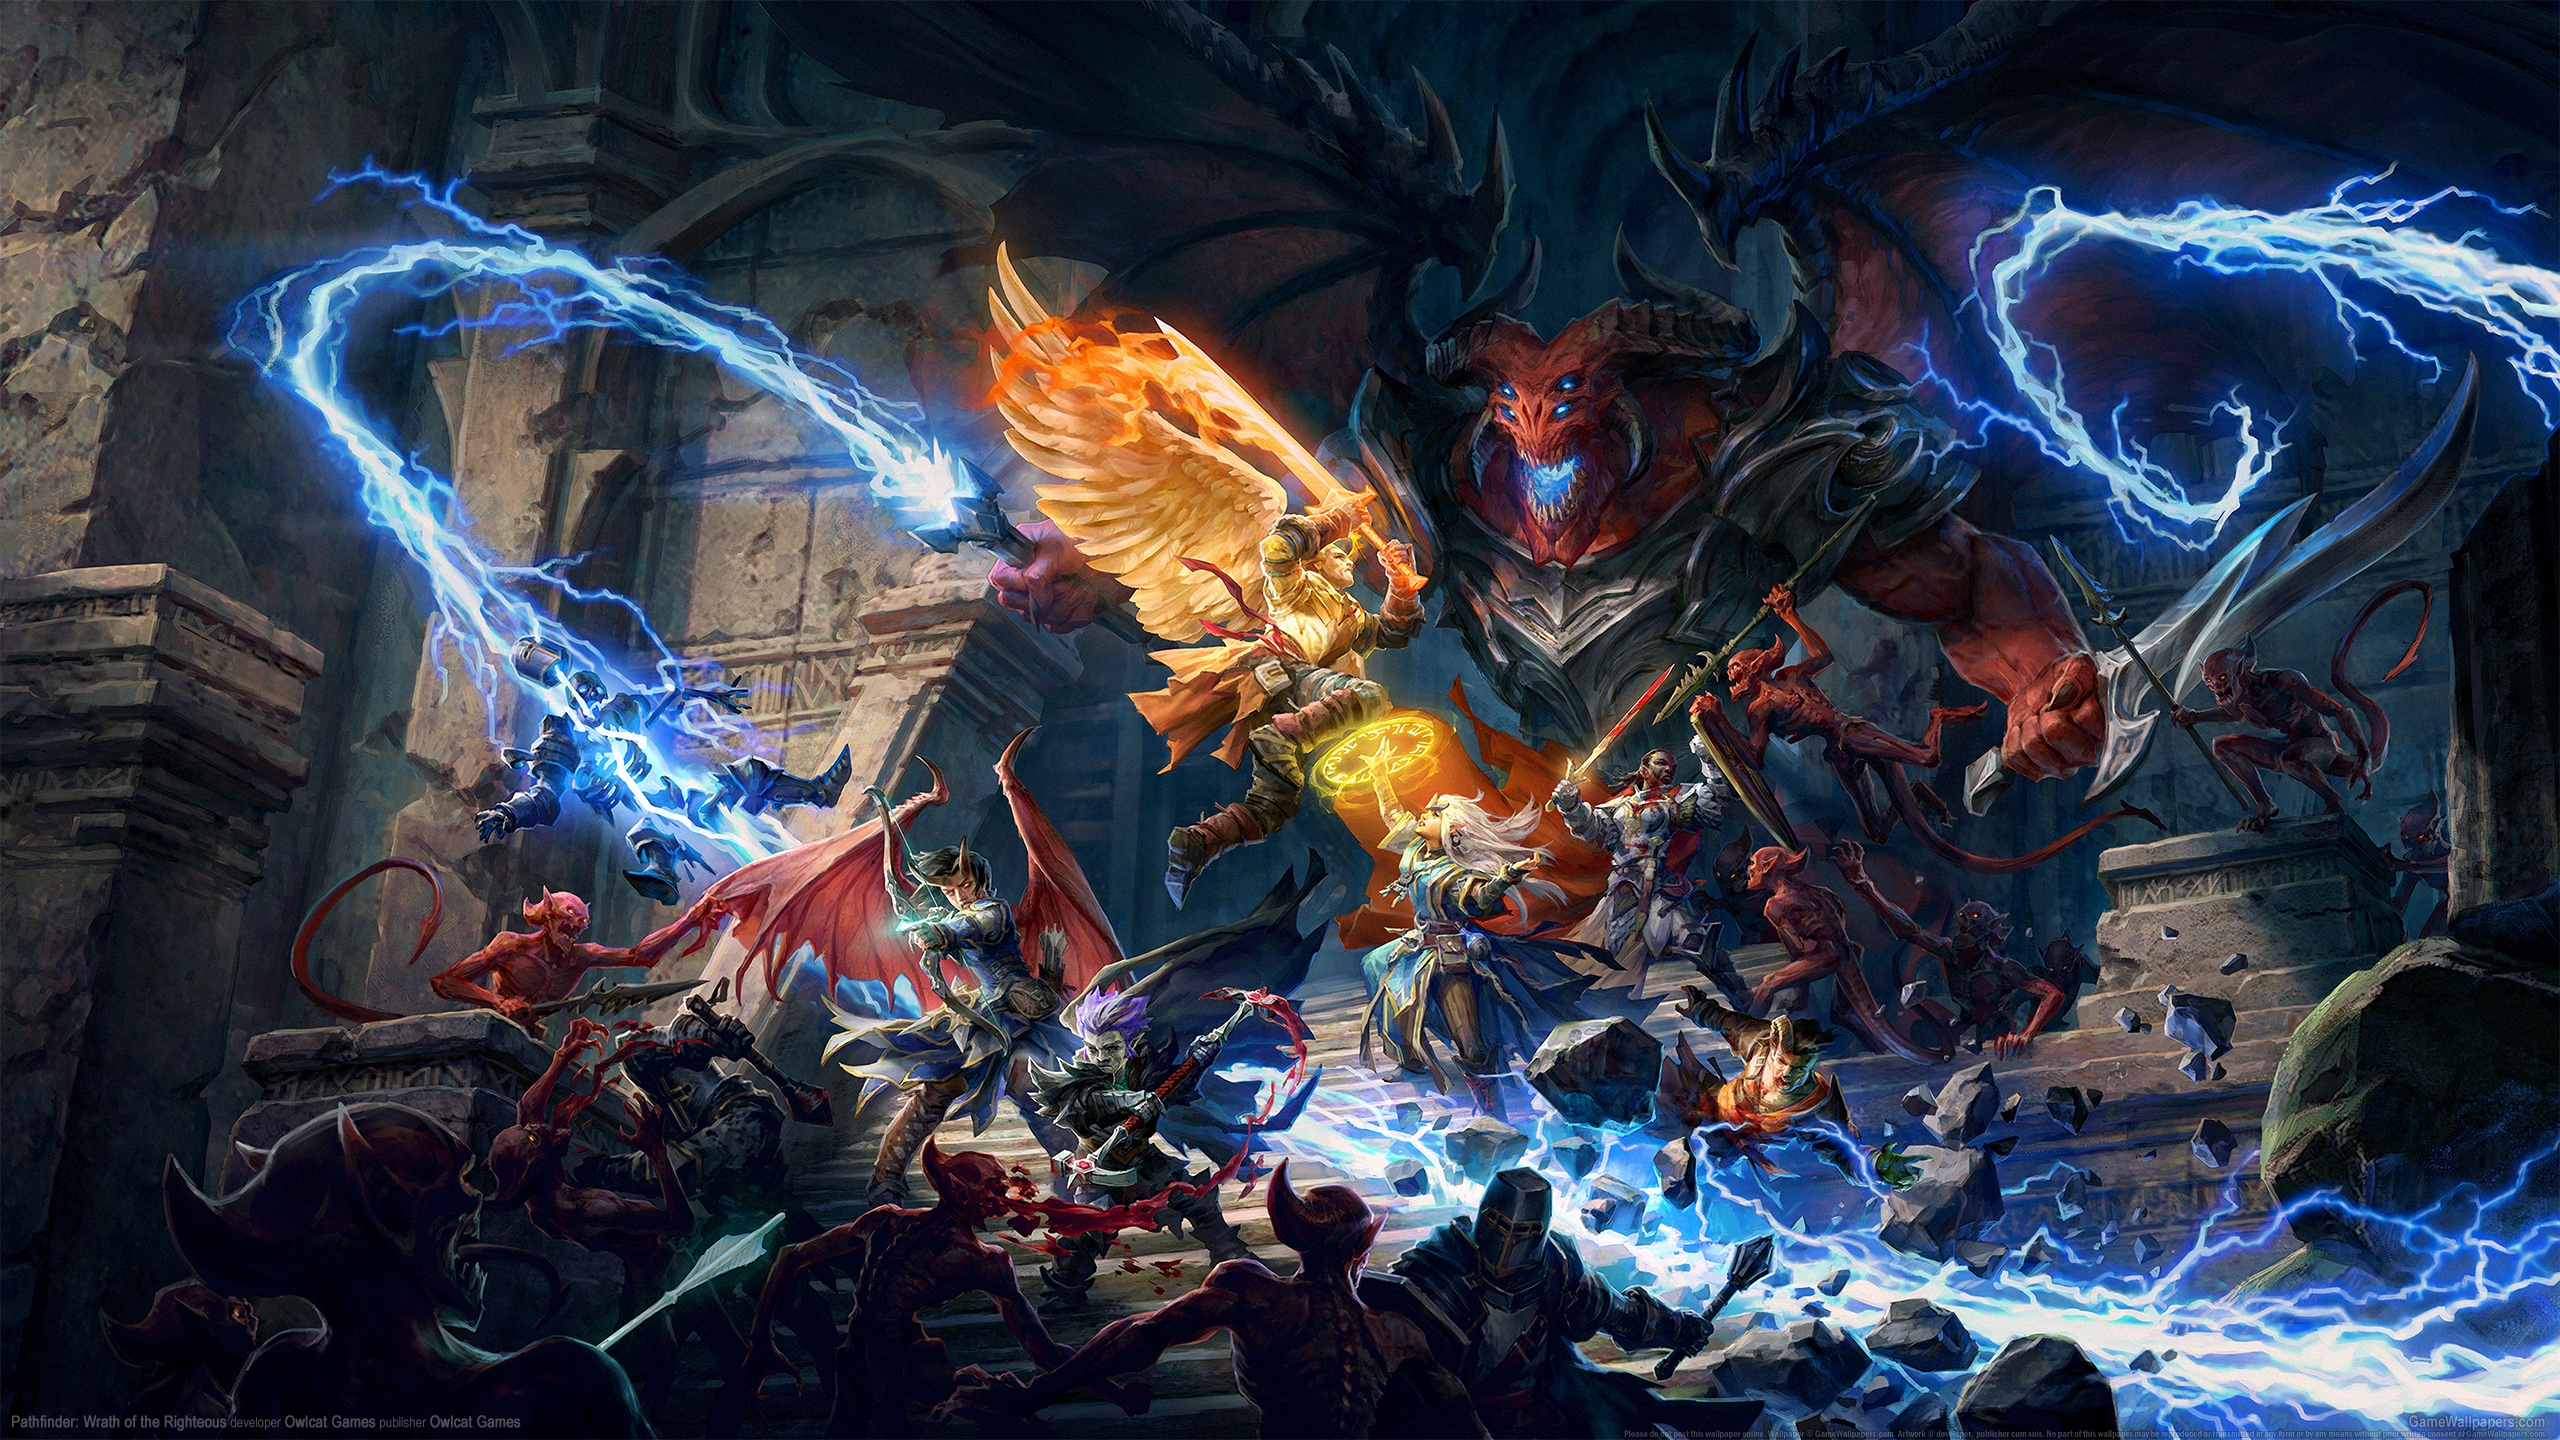 Pathfinder: Wrath of the Righteous 2560x1440 wallpaper or background 01